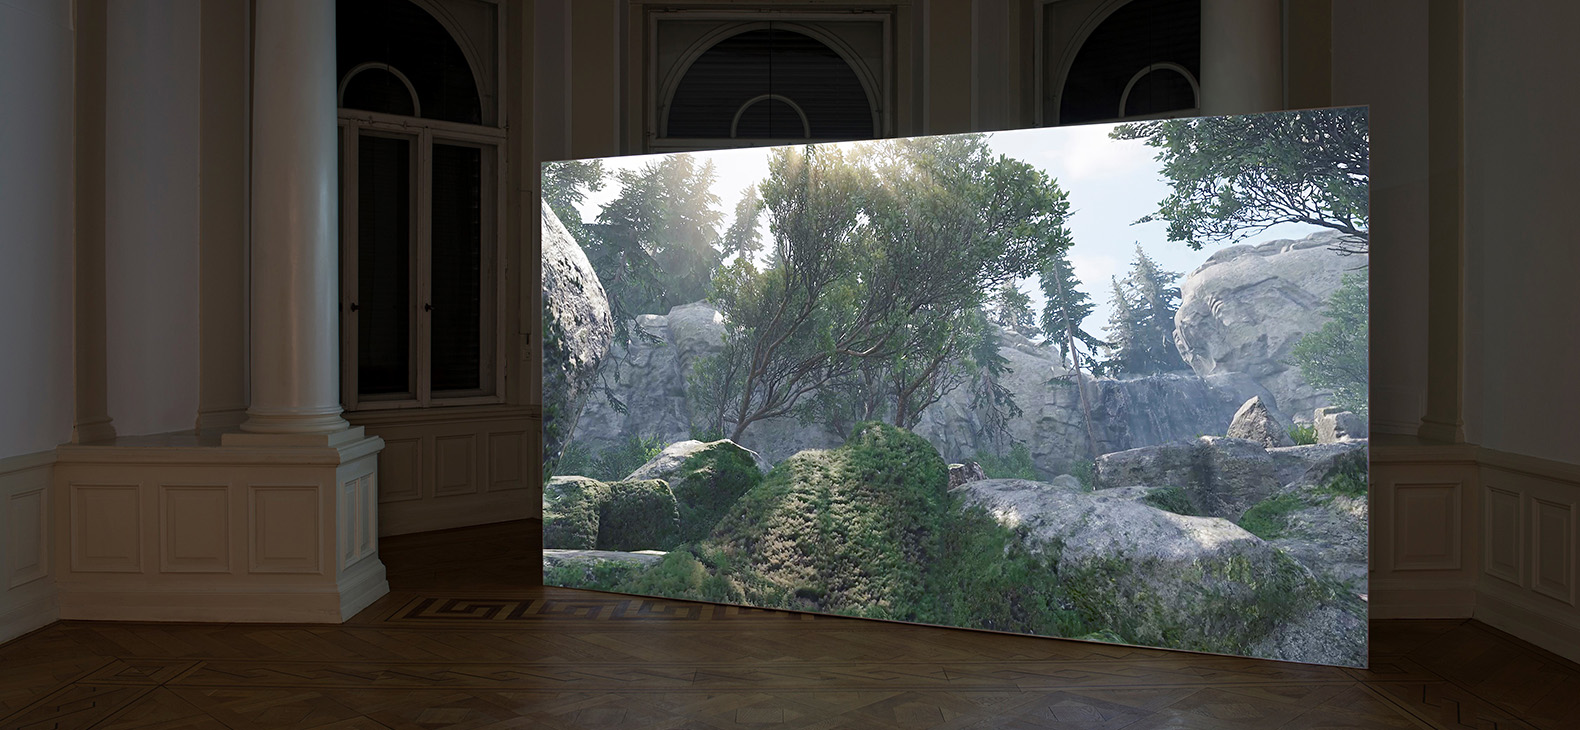 Barbara Herold and Florian Huth: The picture shows a canvas in a room. A computer-generated landscape by Barbara Herold and Florian Huth can be seen on the canvas. The landscape consists of many stones. The sun shines through the crown of a tree at the top center of the picture.